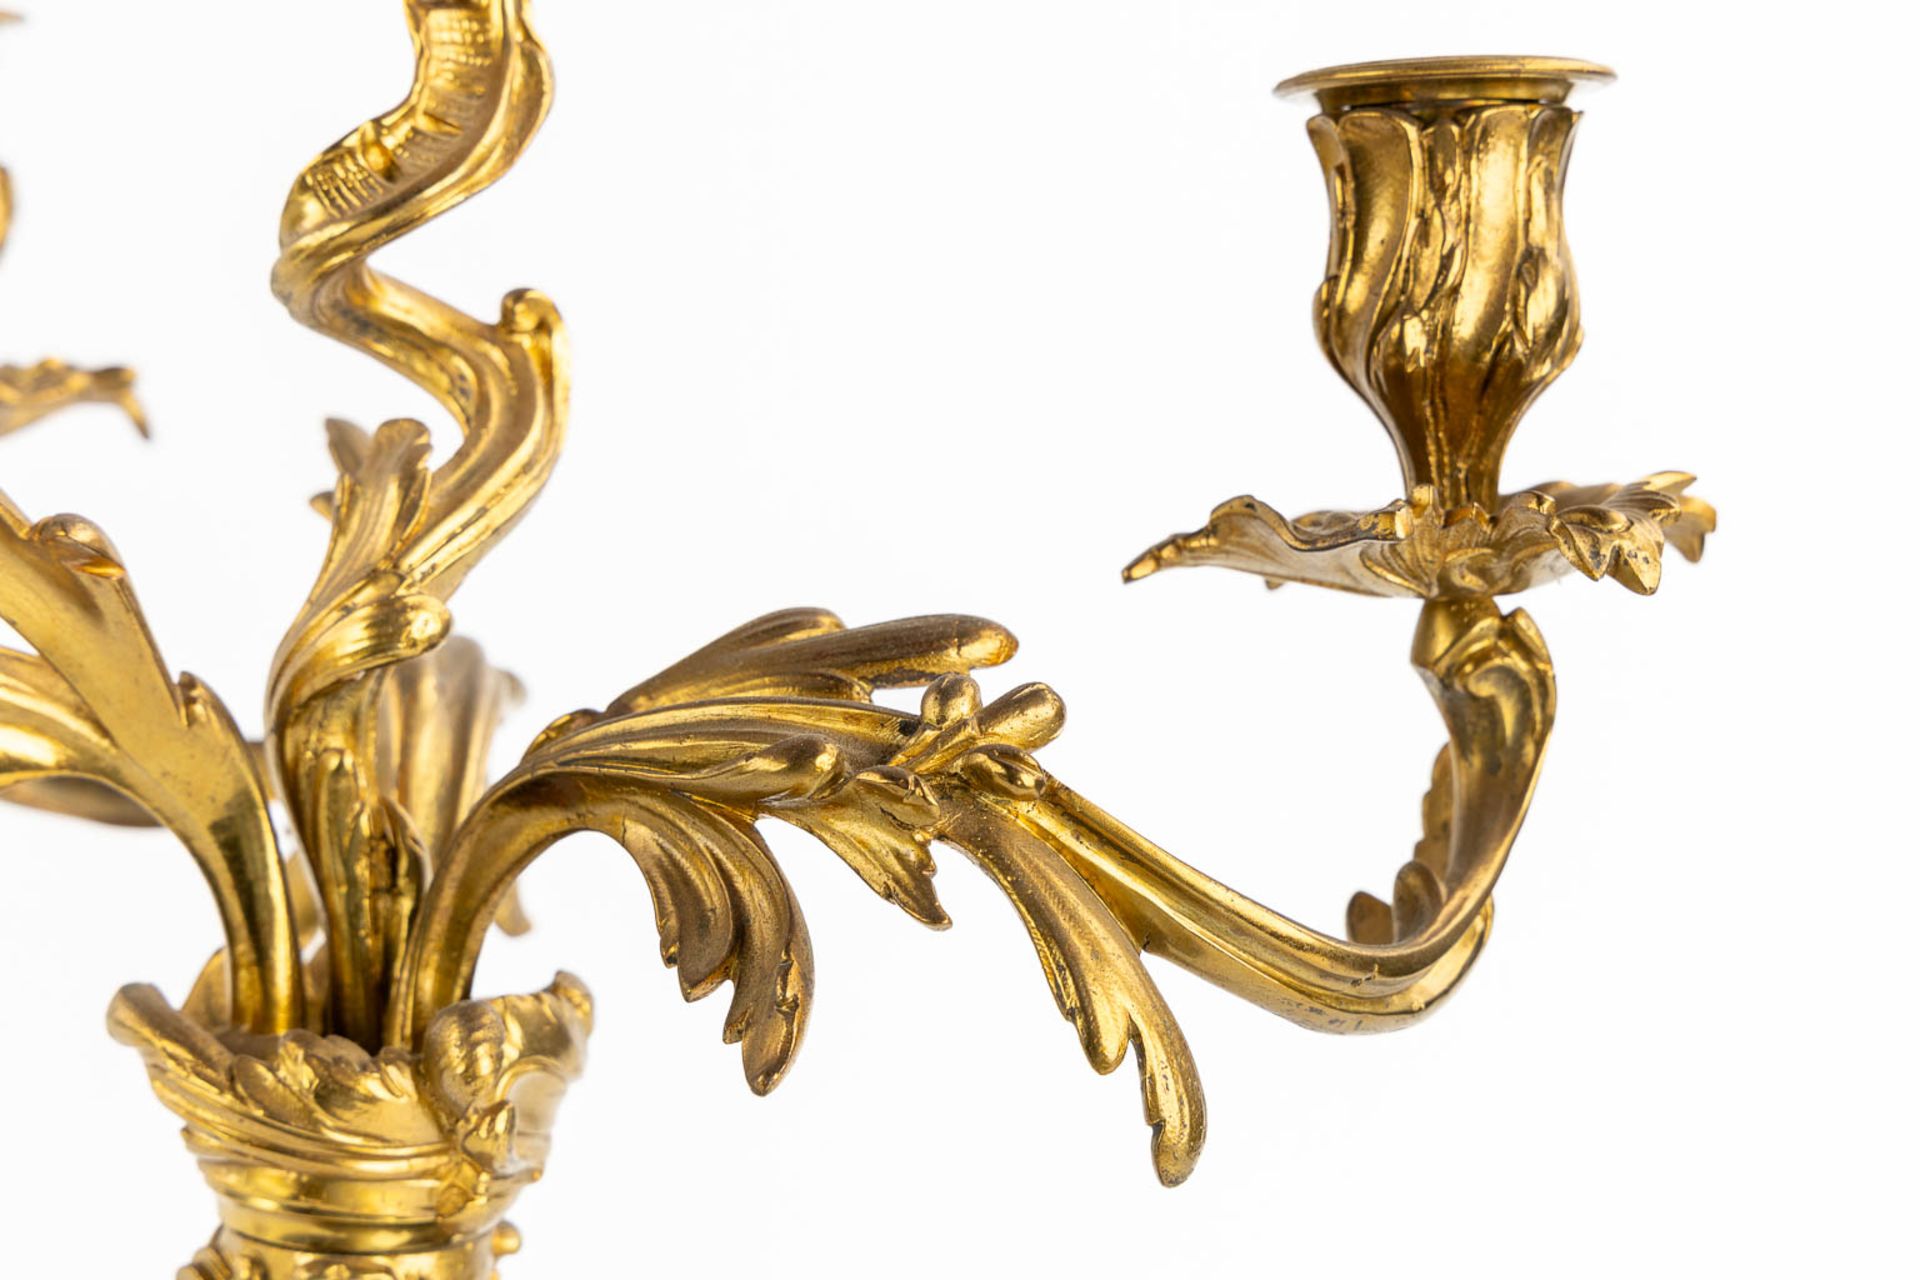 A pair of candelabra, bronze in Louis XV style. Circa 1900. (H:54 x D:27 cm) - Image 9 of 9